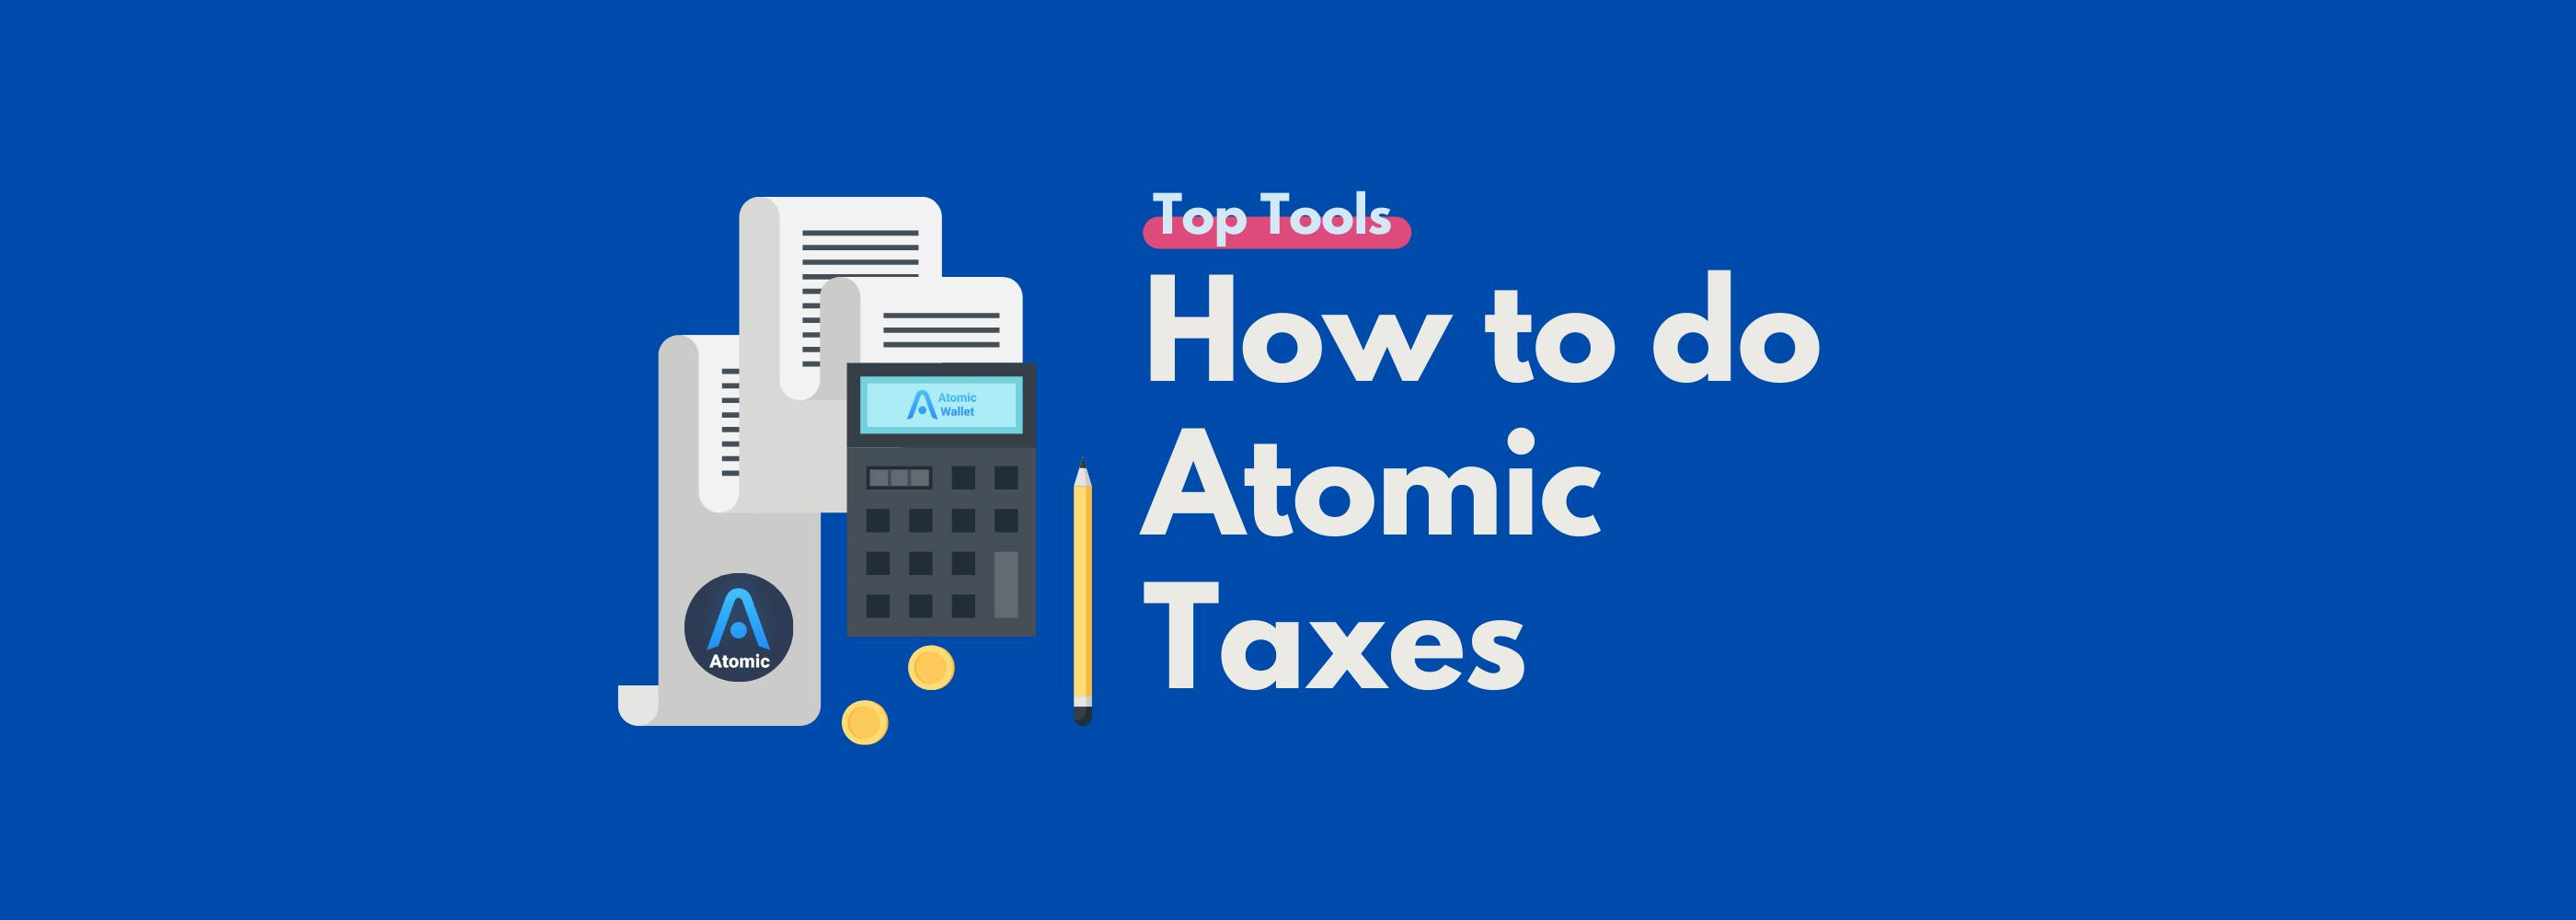 How to do Atomic Taxes